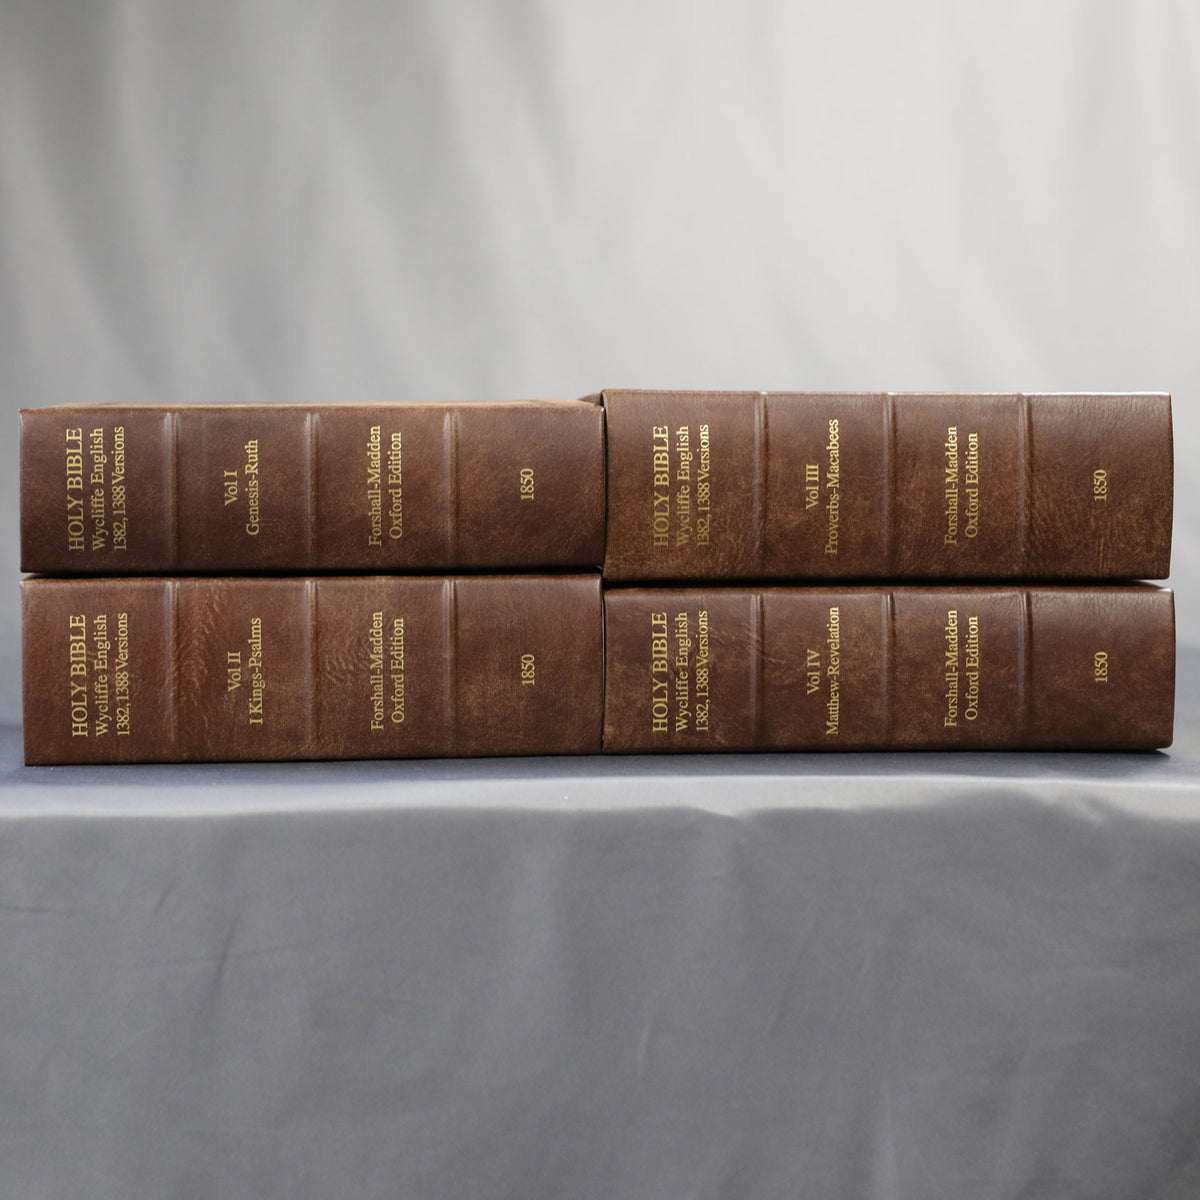 Wycliffe Bible (1382, 1388 versions) - 1850 Forshall-Madden Oxford Edition Facsimile 4-Volume Set